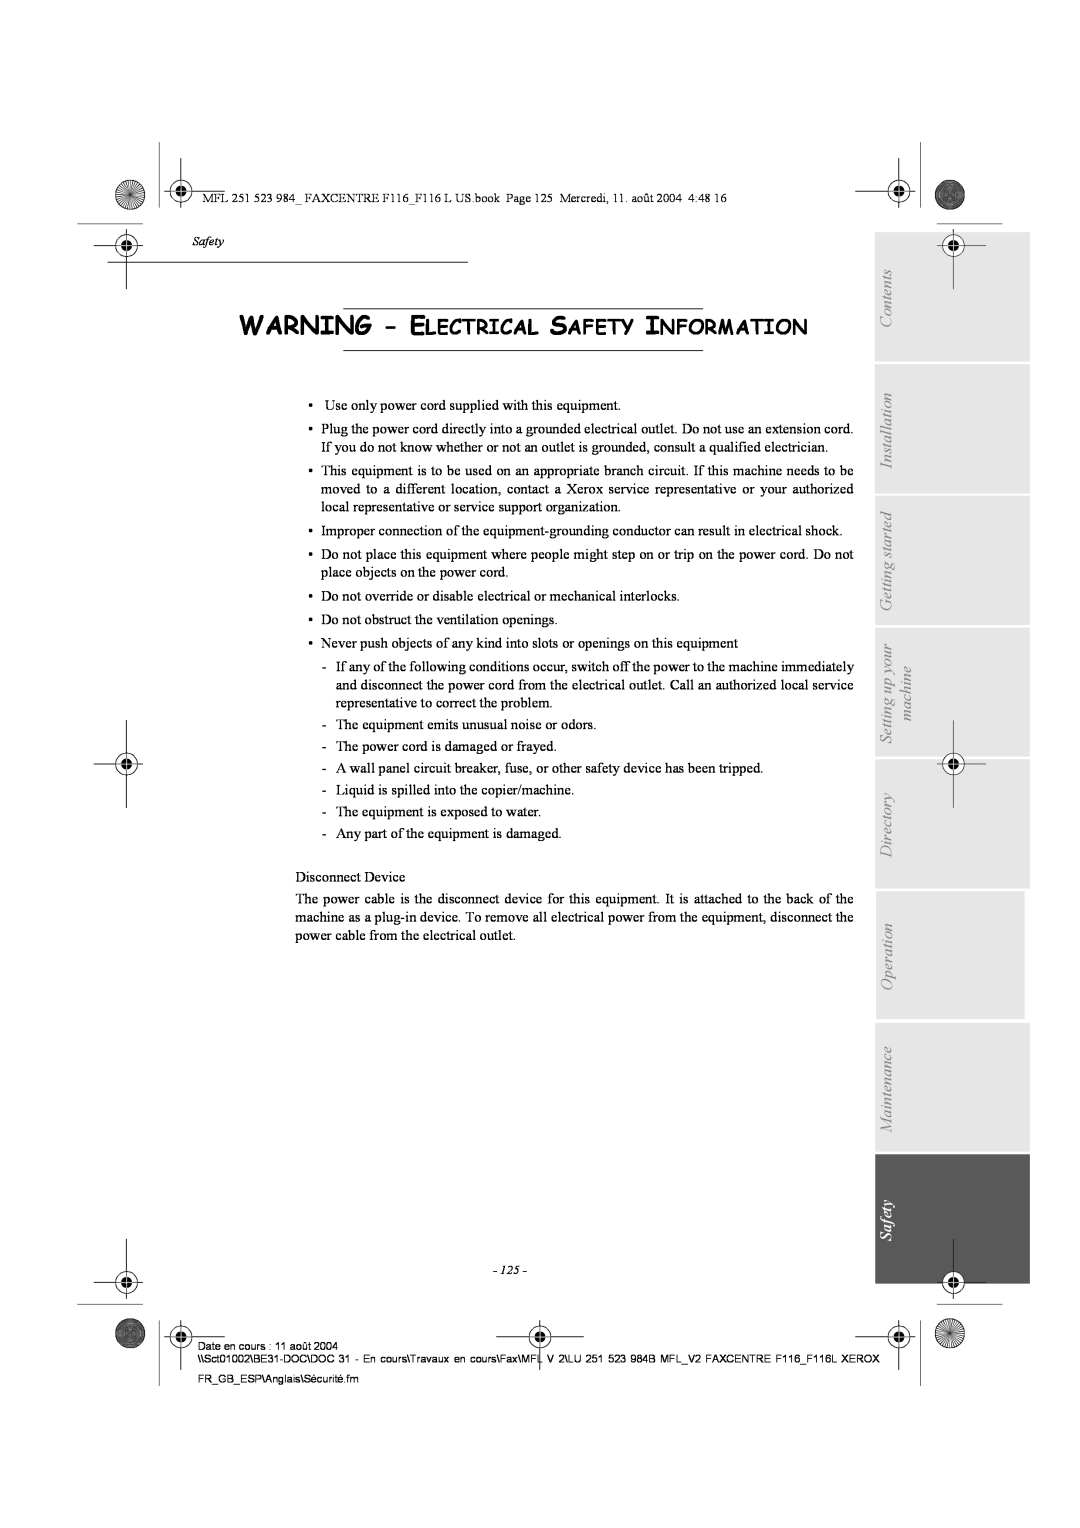 Xerox F116 user manual Warning - Electrical Safety Information 